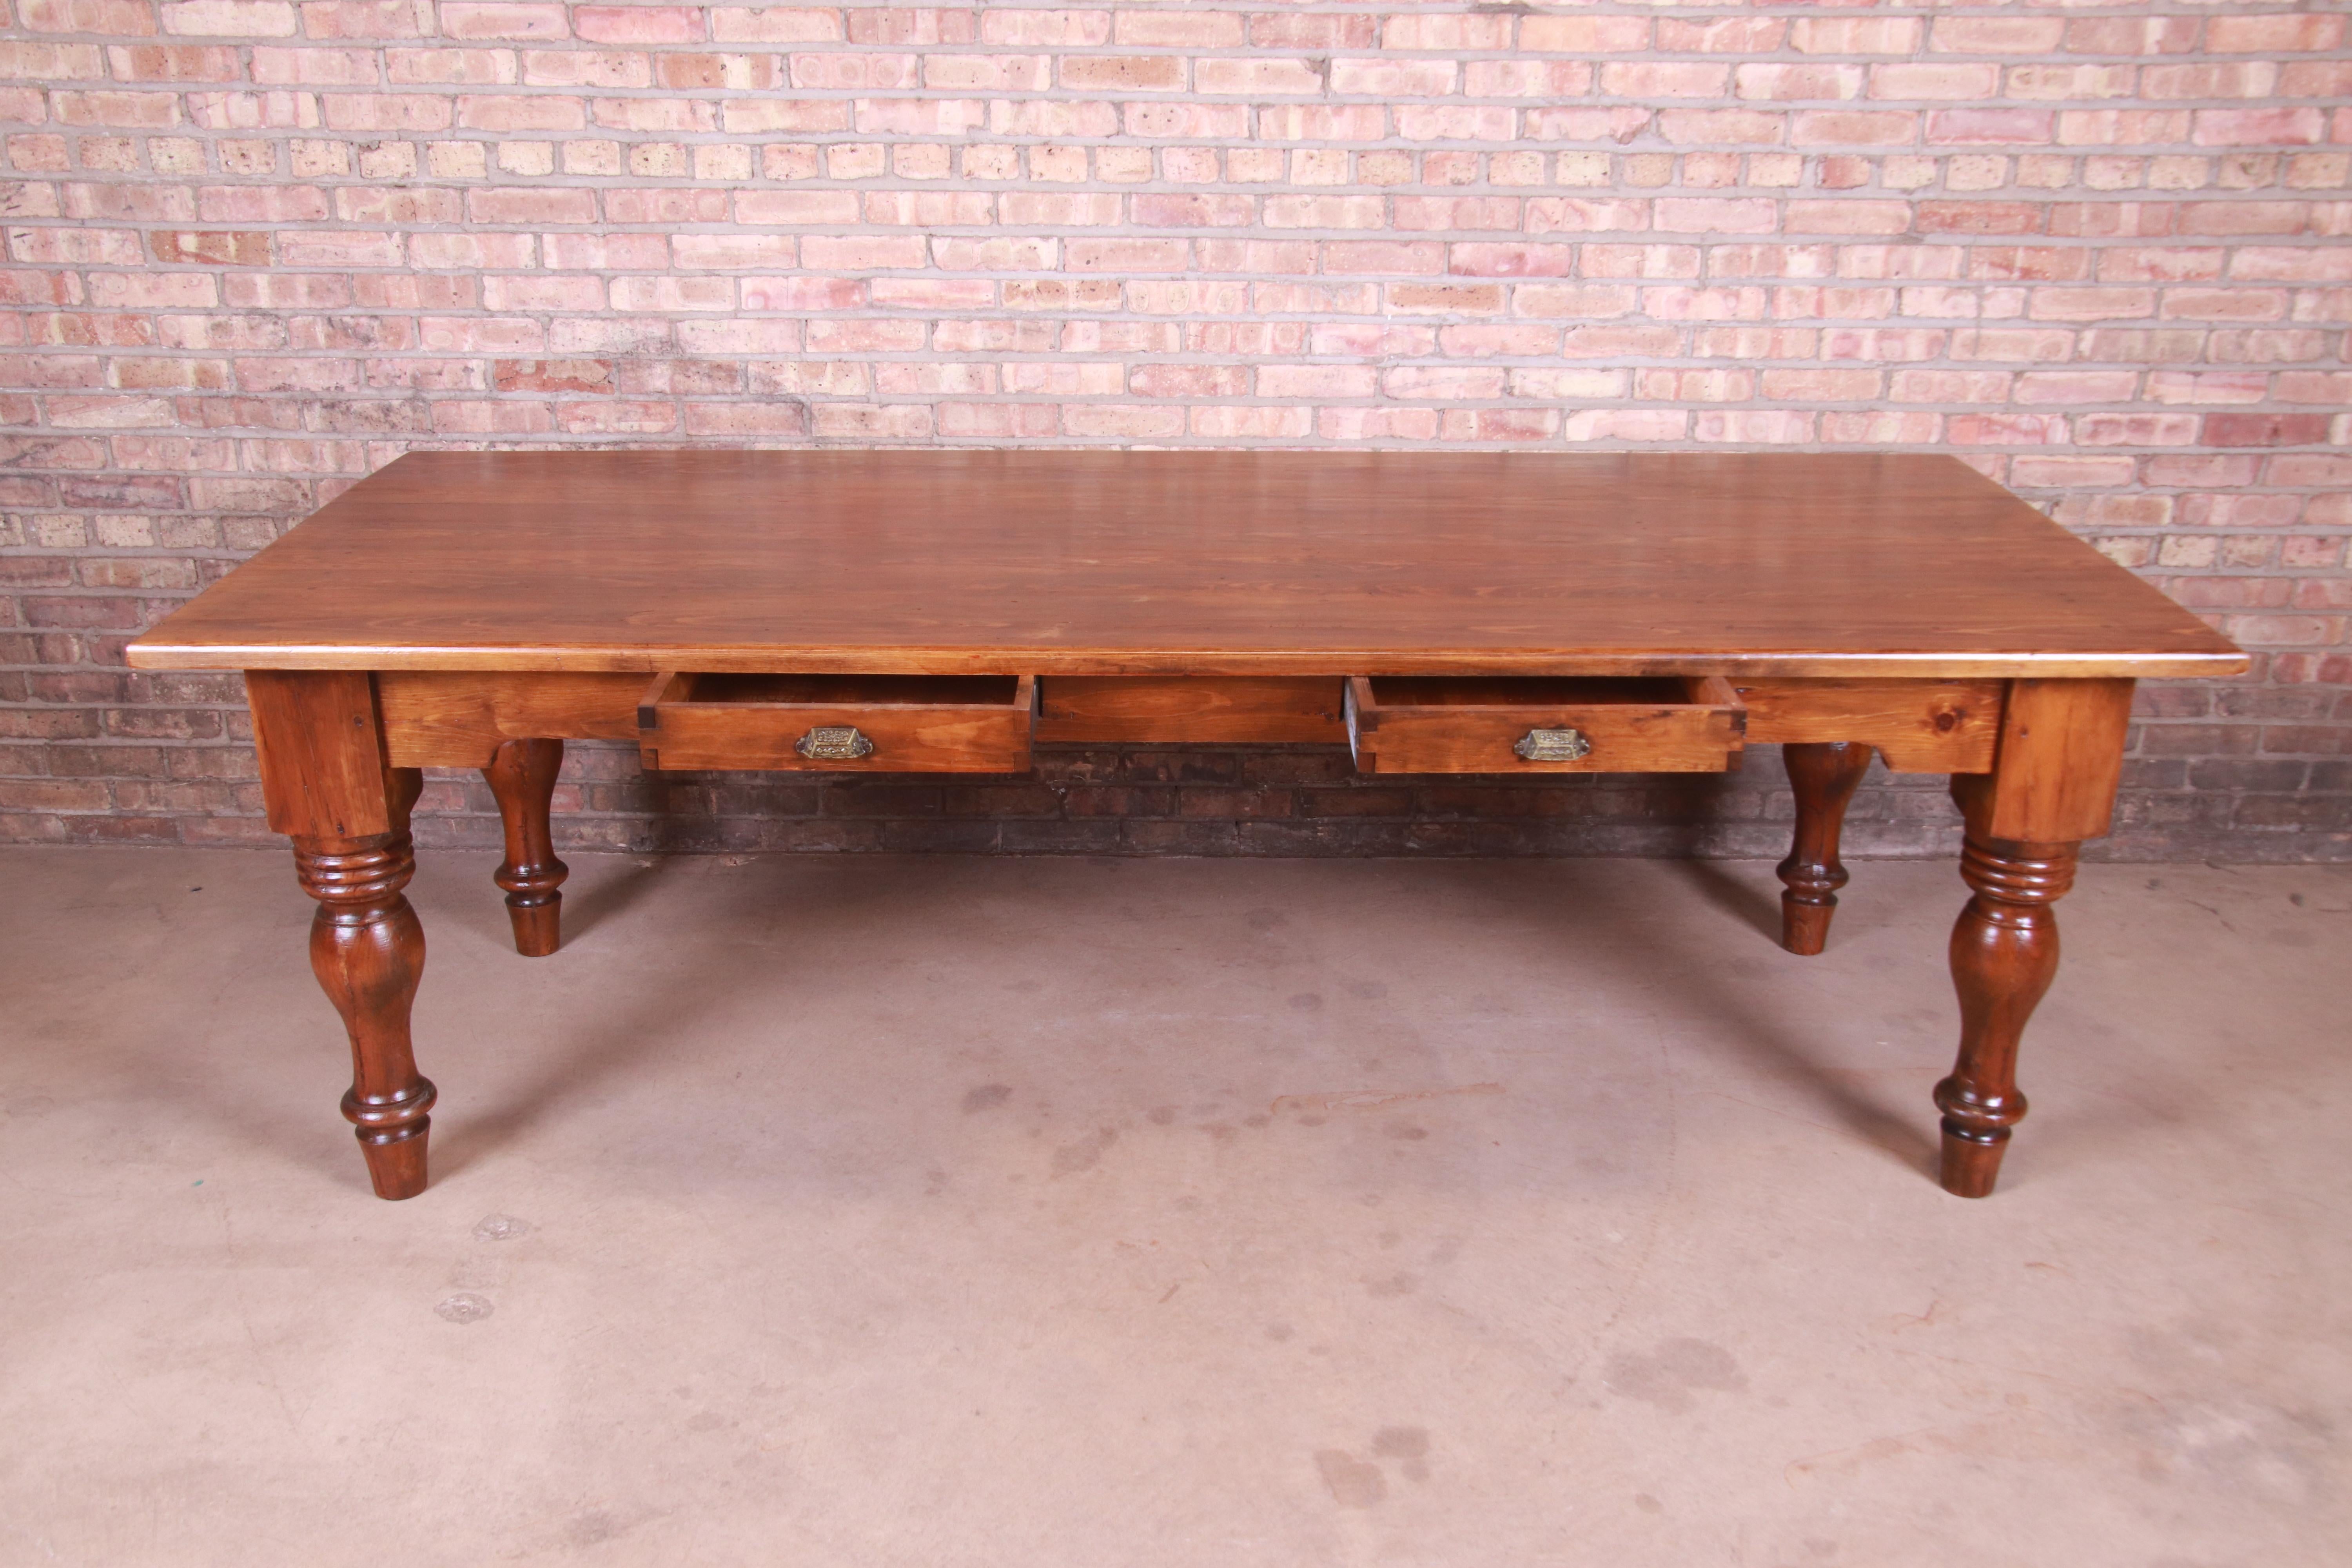 19th Century Rustic Pine American Harvest Farm Table with Drawers 4